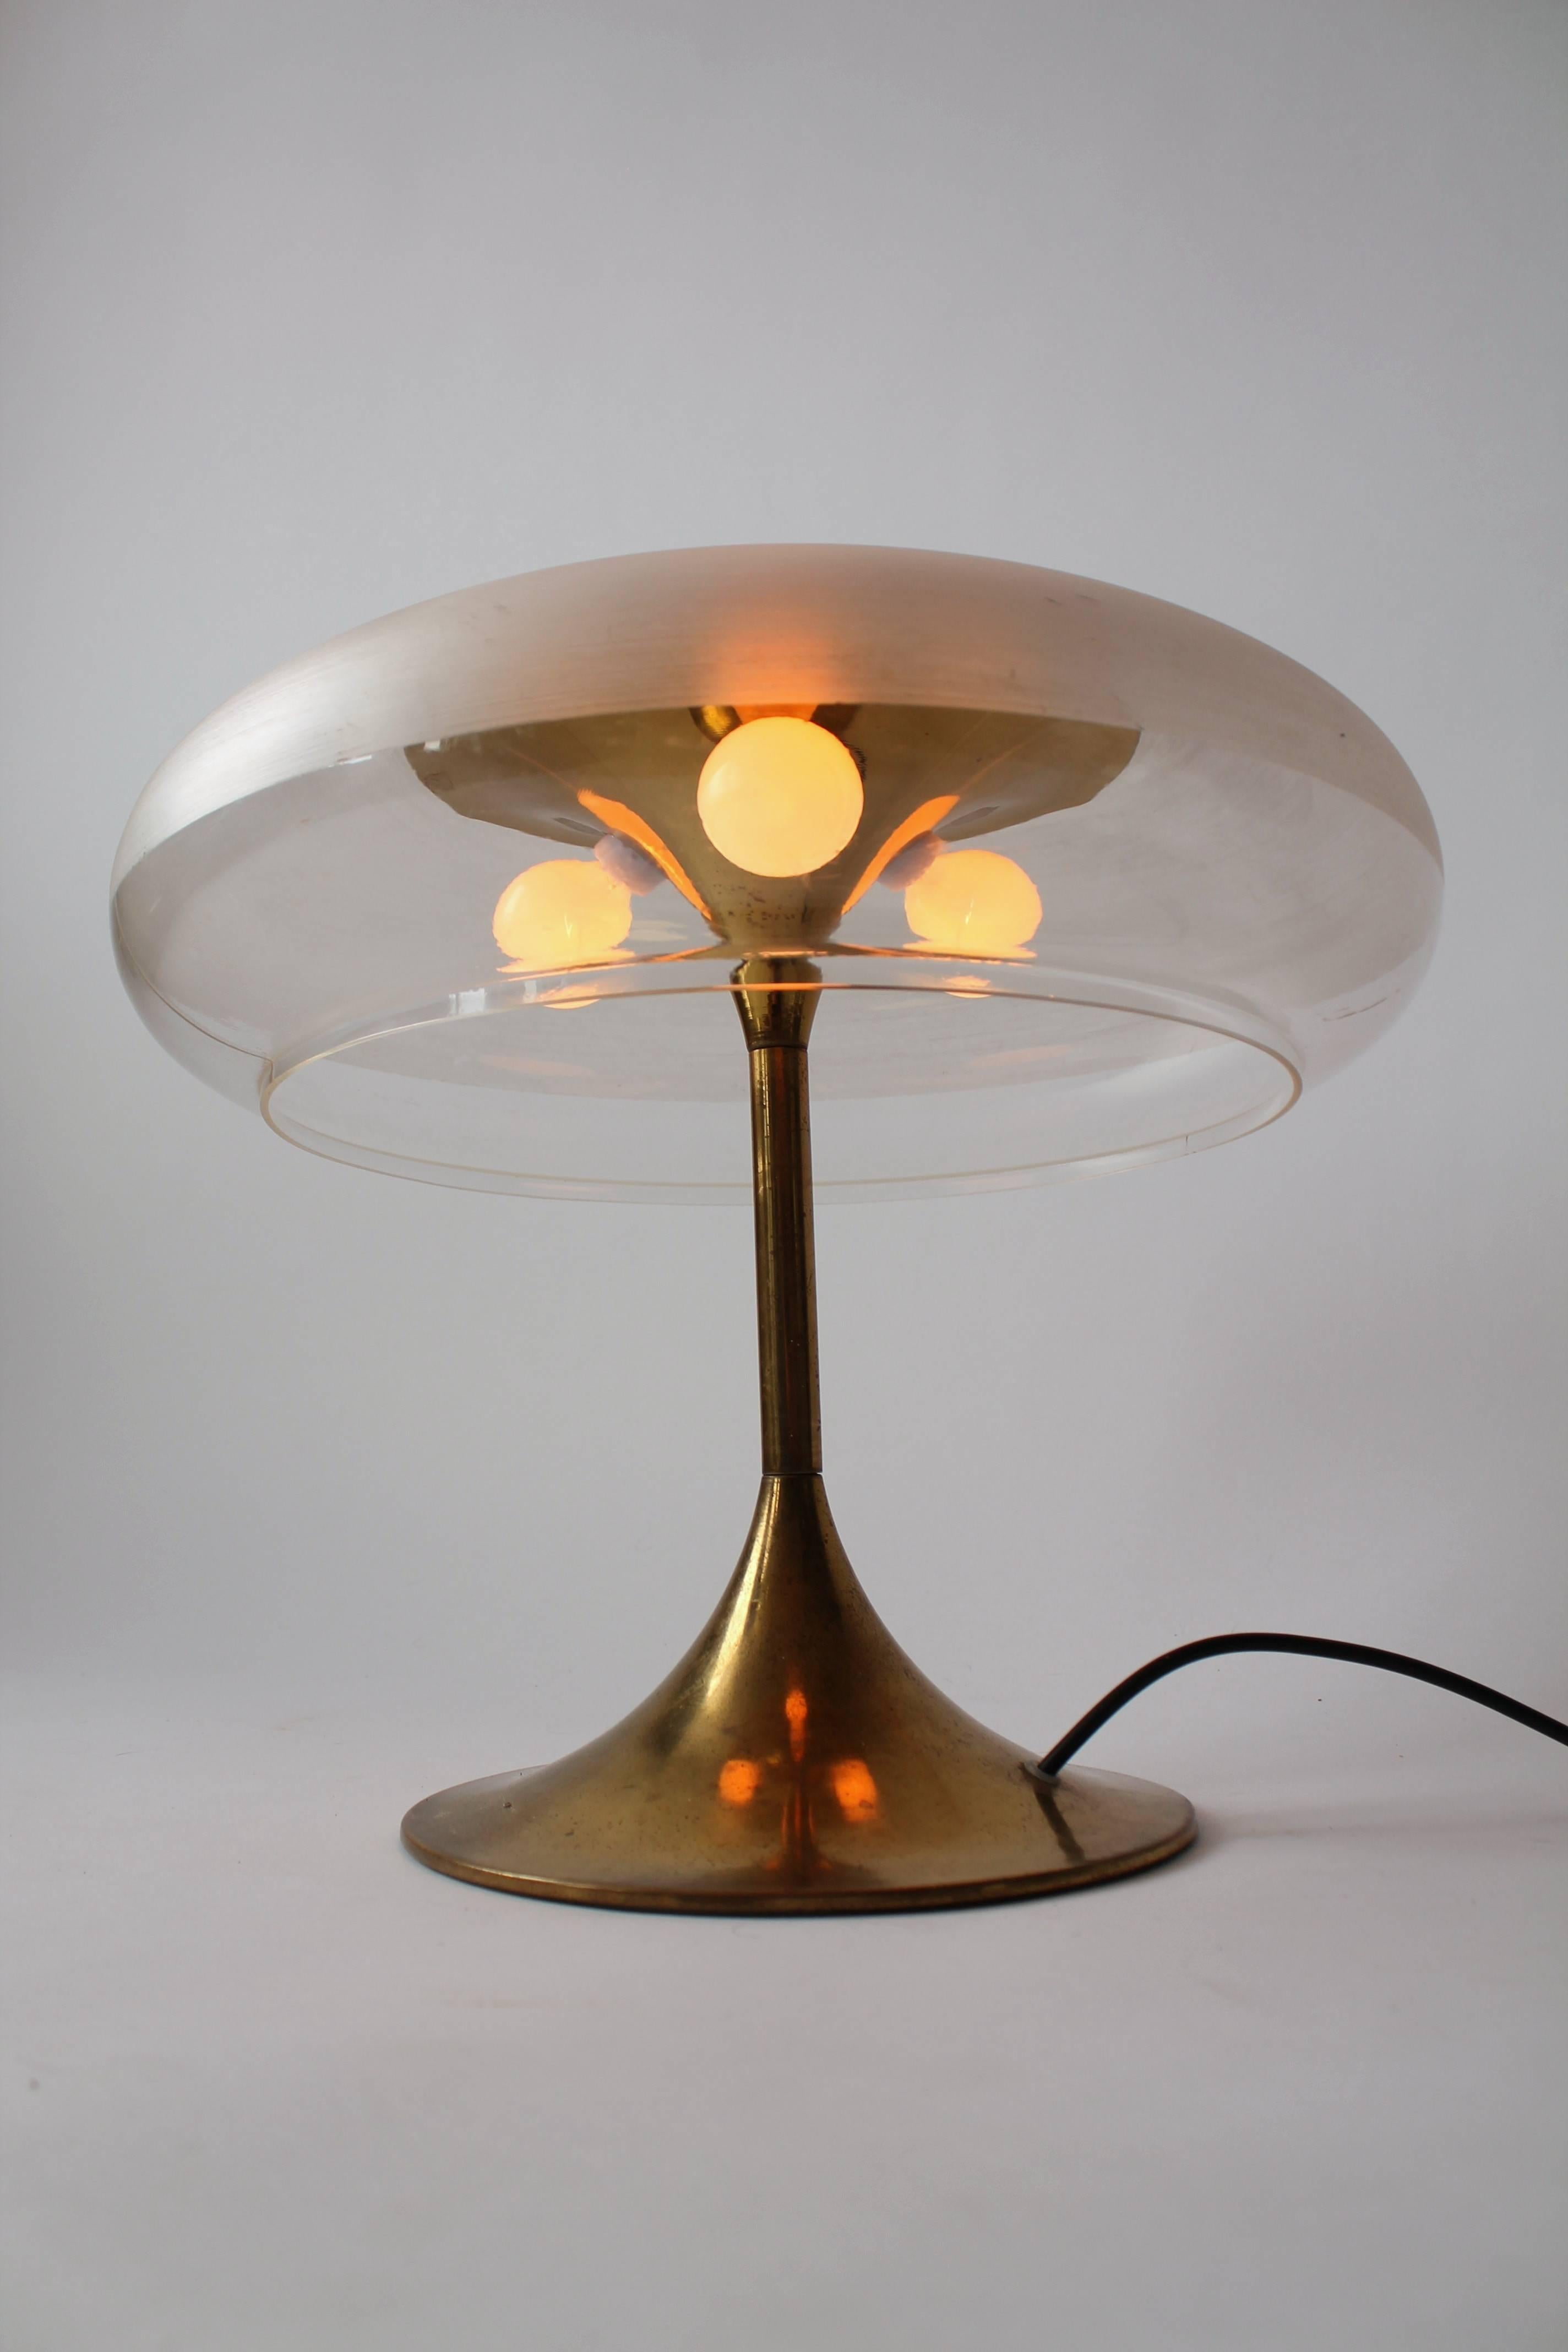 Mid-Century Modern Reggiani  Brass and Clear Acrylic Shade Table Lamp , 1960s , Italy  